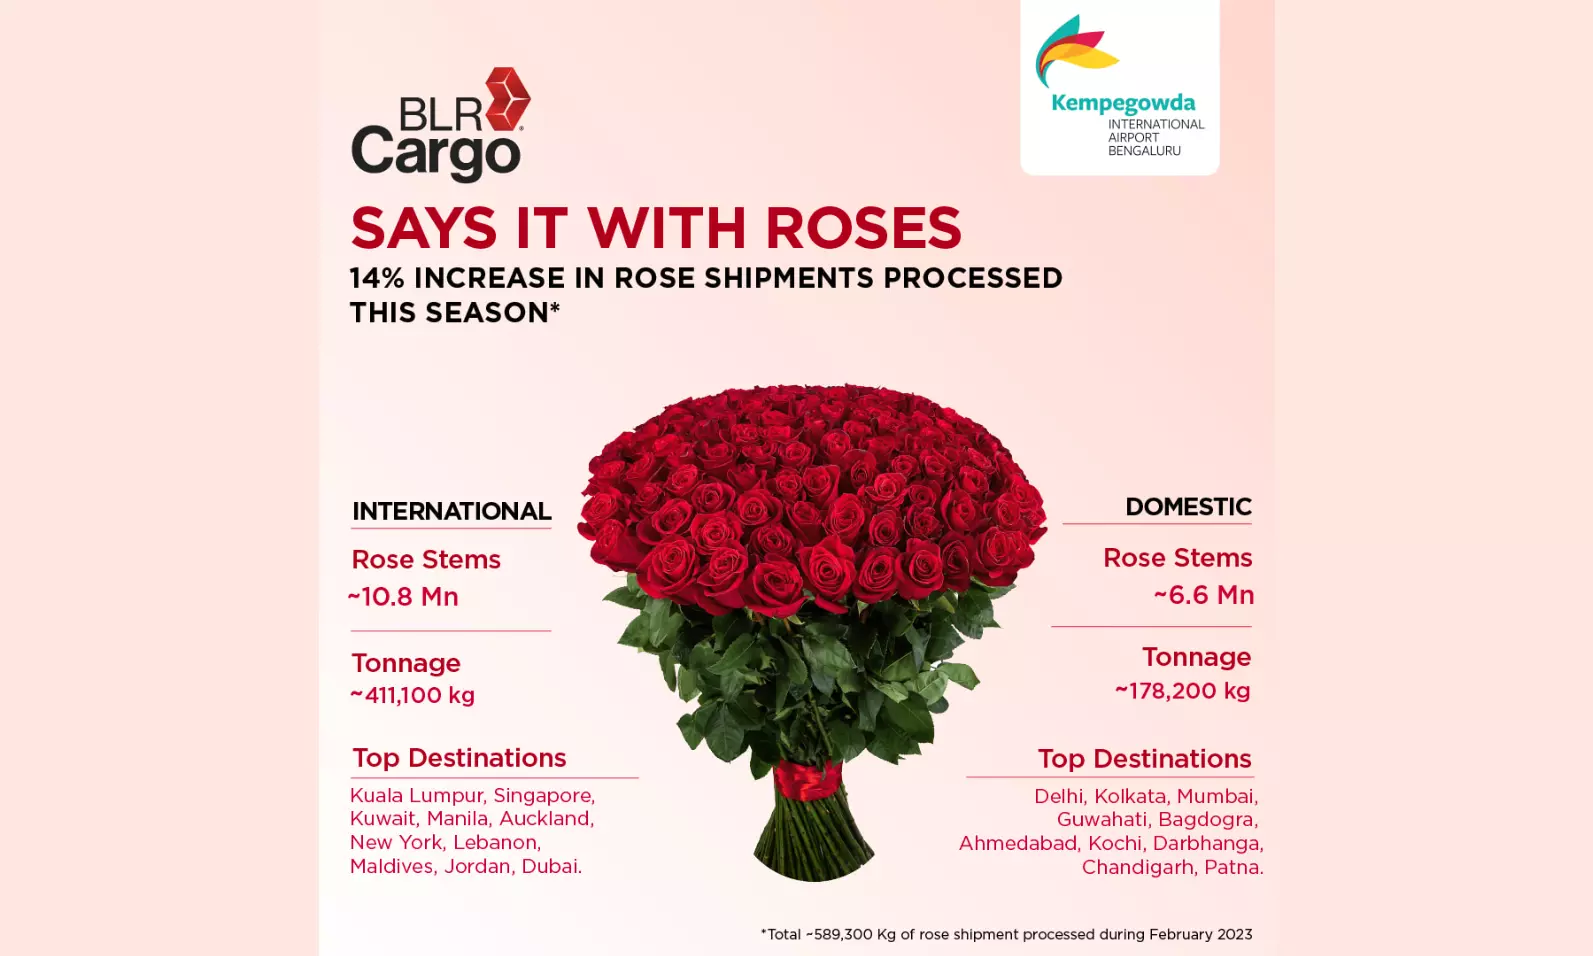 BLR Airport handles 14% more roses this Valentine’s season